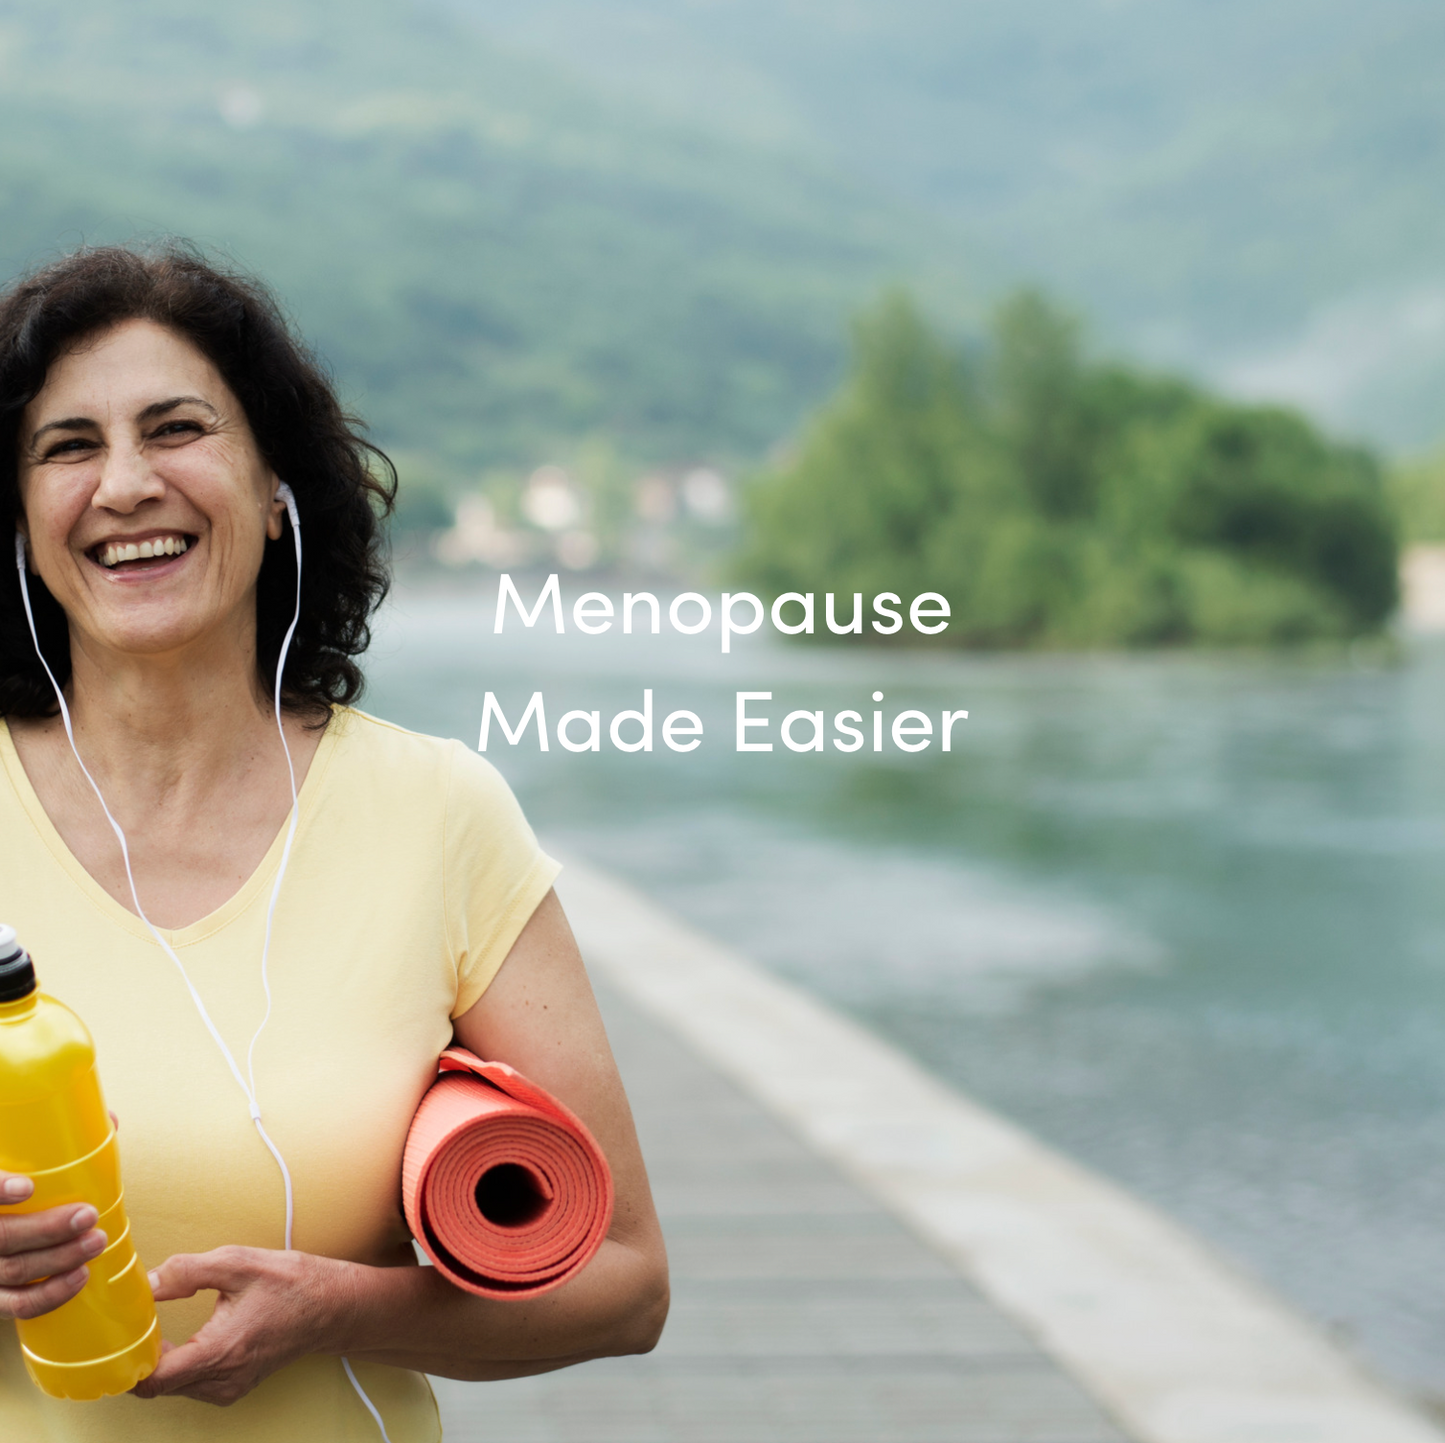 Looking back on Menopause Awareness Month